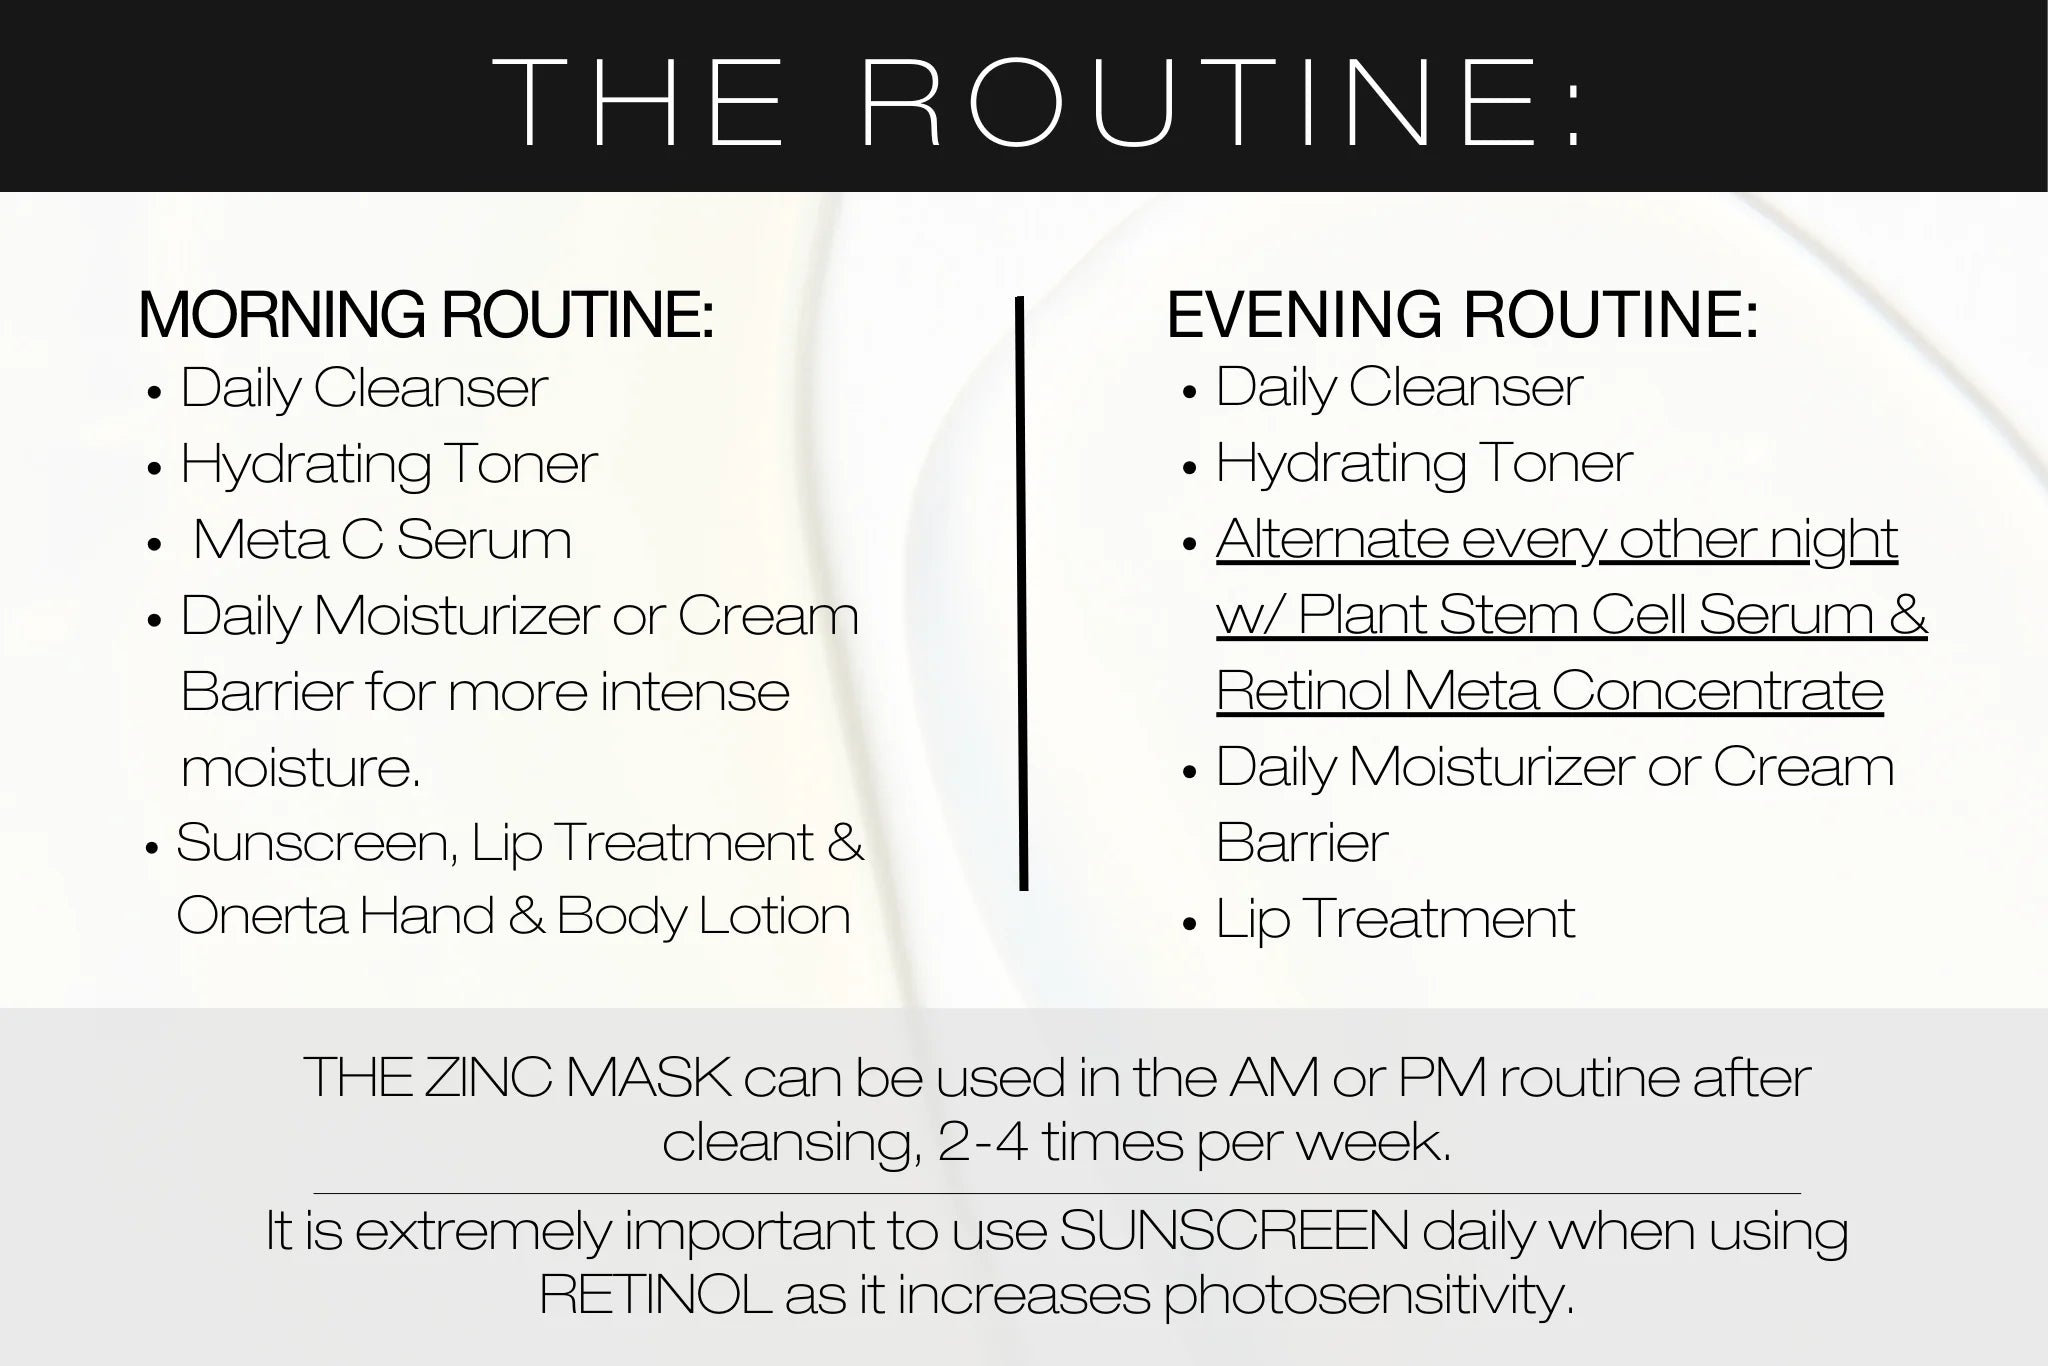 THE ROUTINE